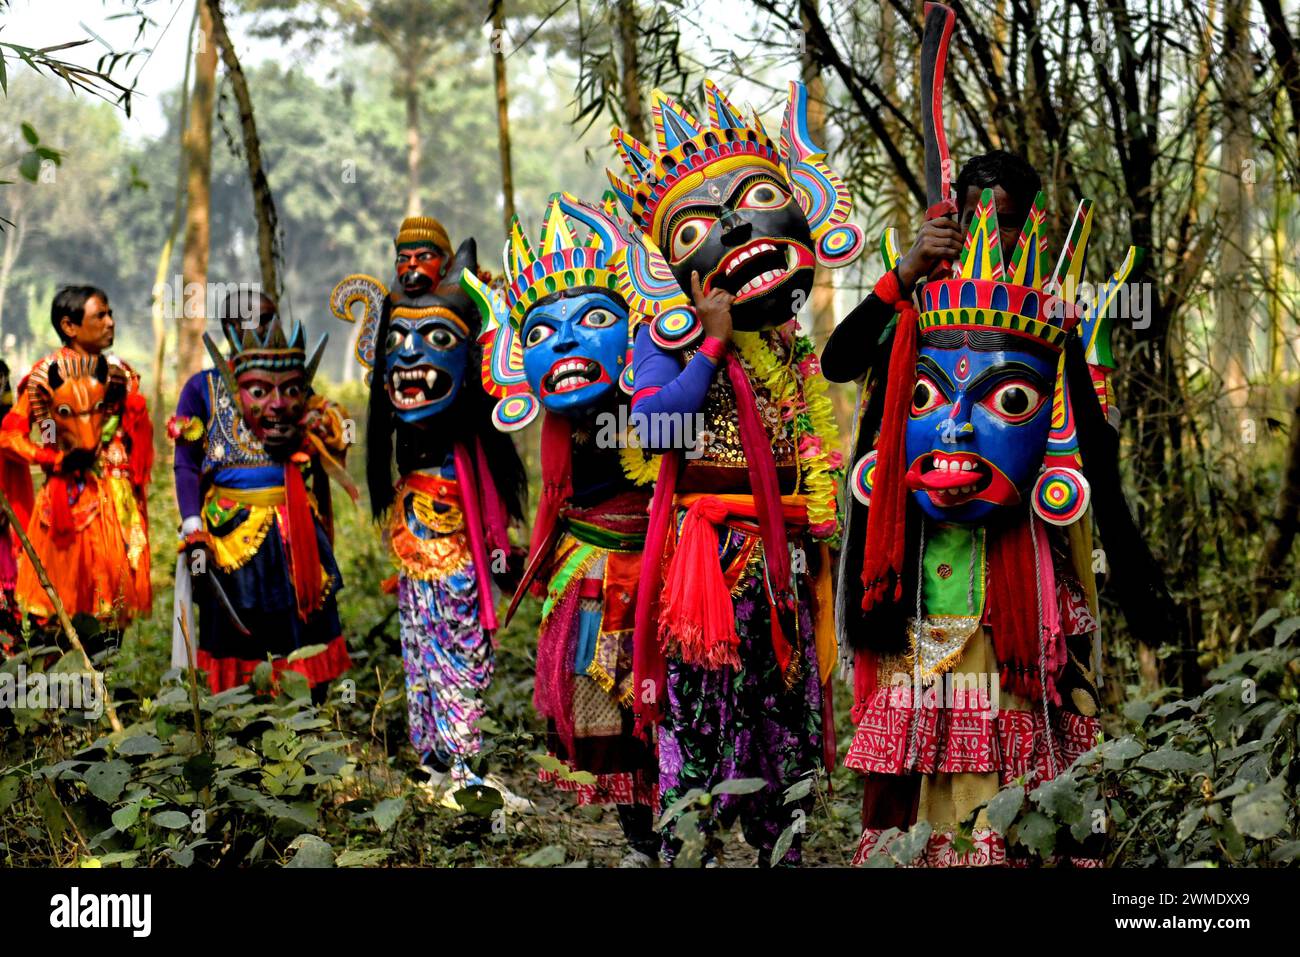 Masked dancers of Gomira dance troupe wait at a bamboo field during their performance at a village near Raiganj. Gomira is a masked dance form. The word ‘Gomira' has been derived from the colloquial form of the word ‘Gram-Chandi' or the female deity who is the protective force of the village. The exact origin of the dance form is not traceable and the knowledge has been lost over time. Gomira dance is a rural dance form mainly practiced in the Dinajpur district of West Bengal. The Gomira dances are organized to appease the deity to usher in the 'good forces' and drive out the 'evil forces'. It Stock Photo